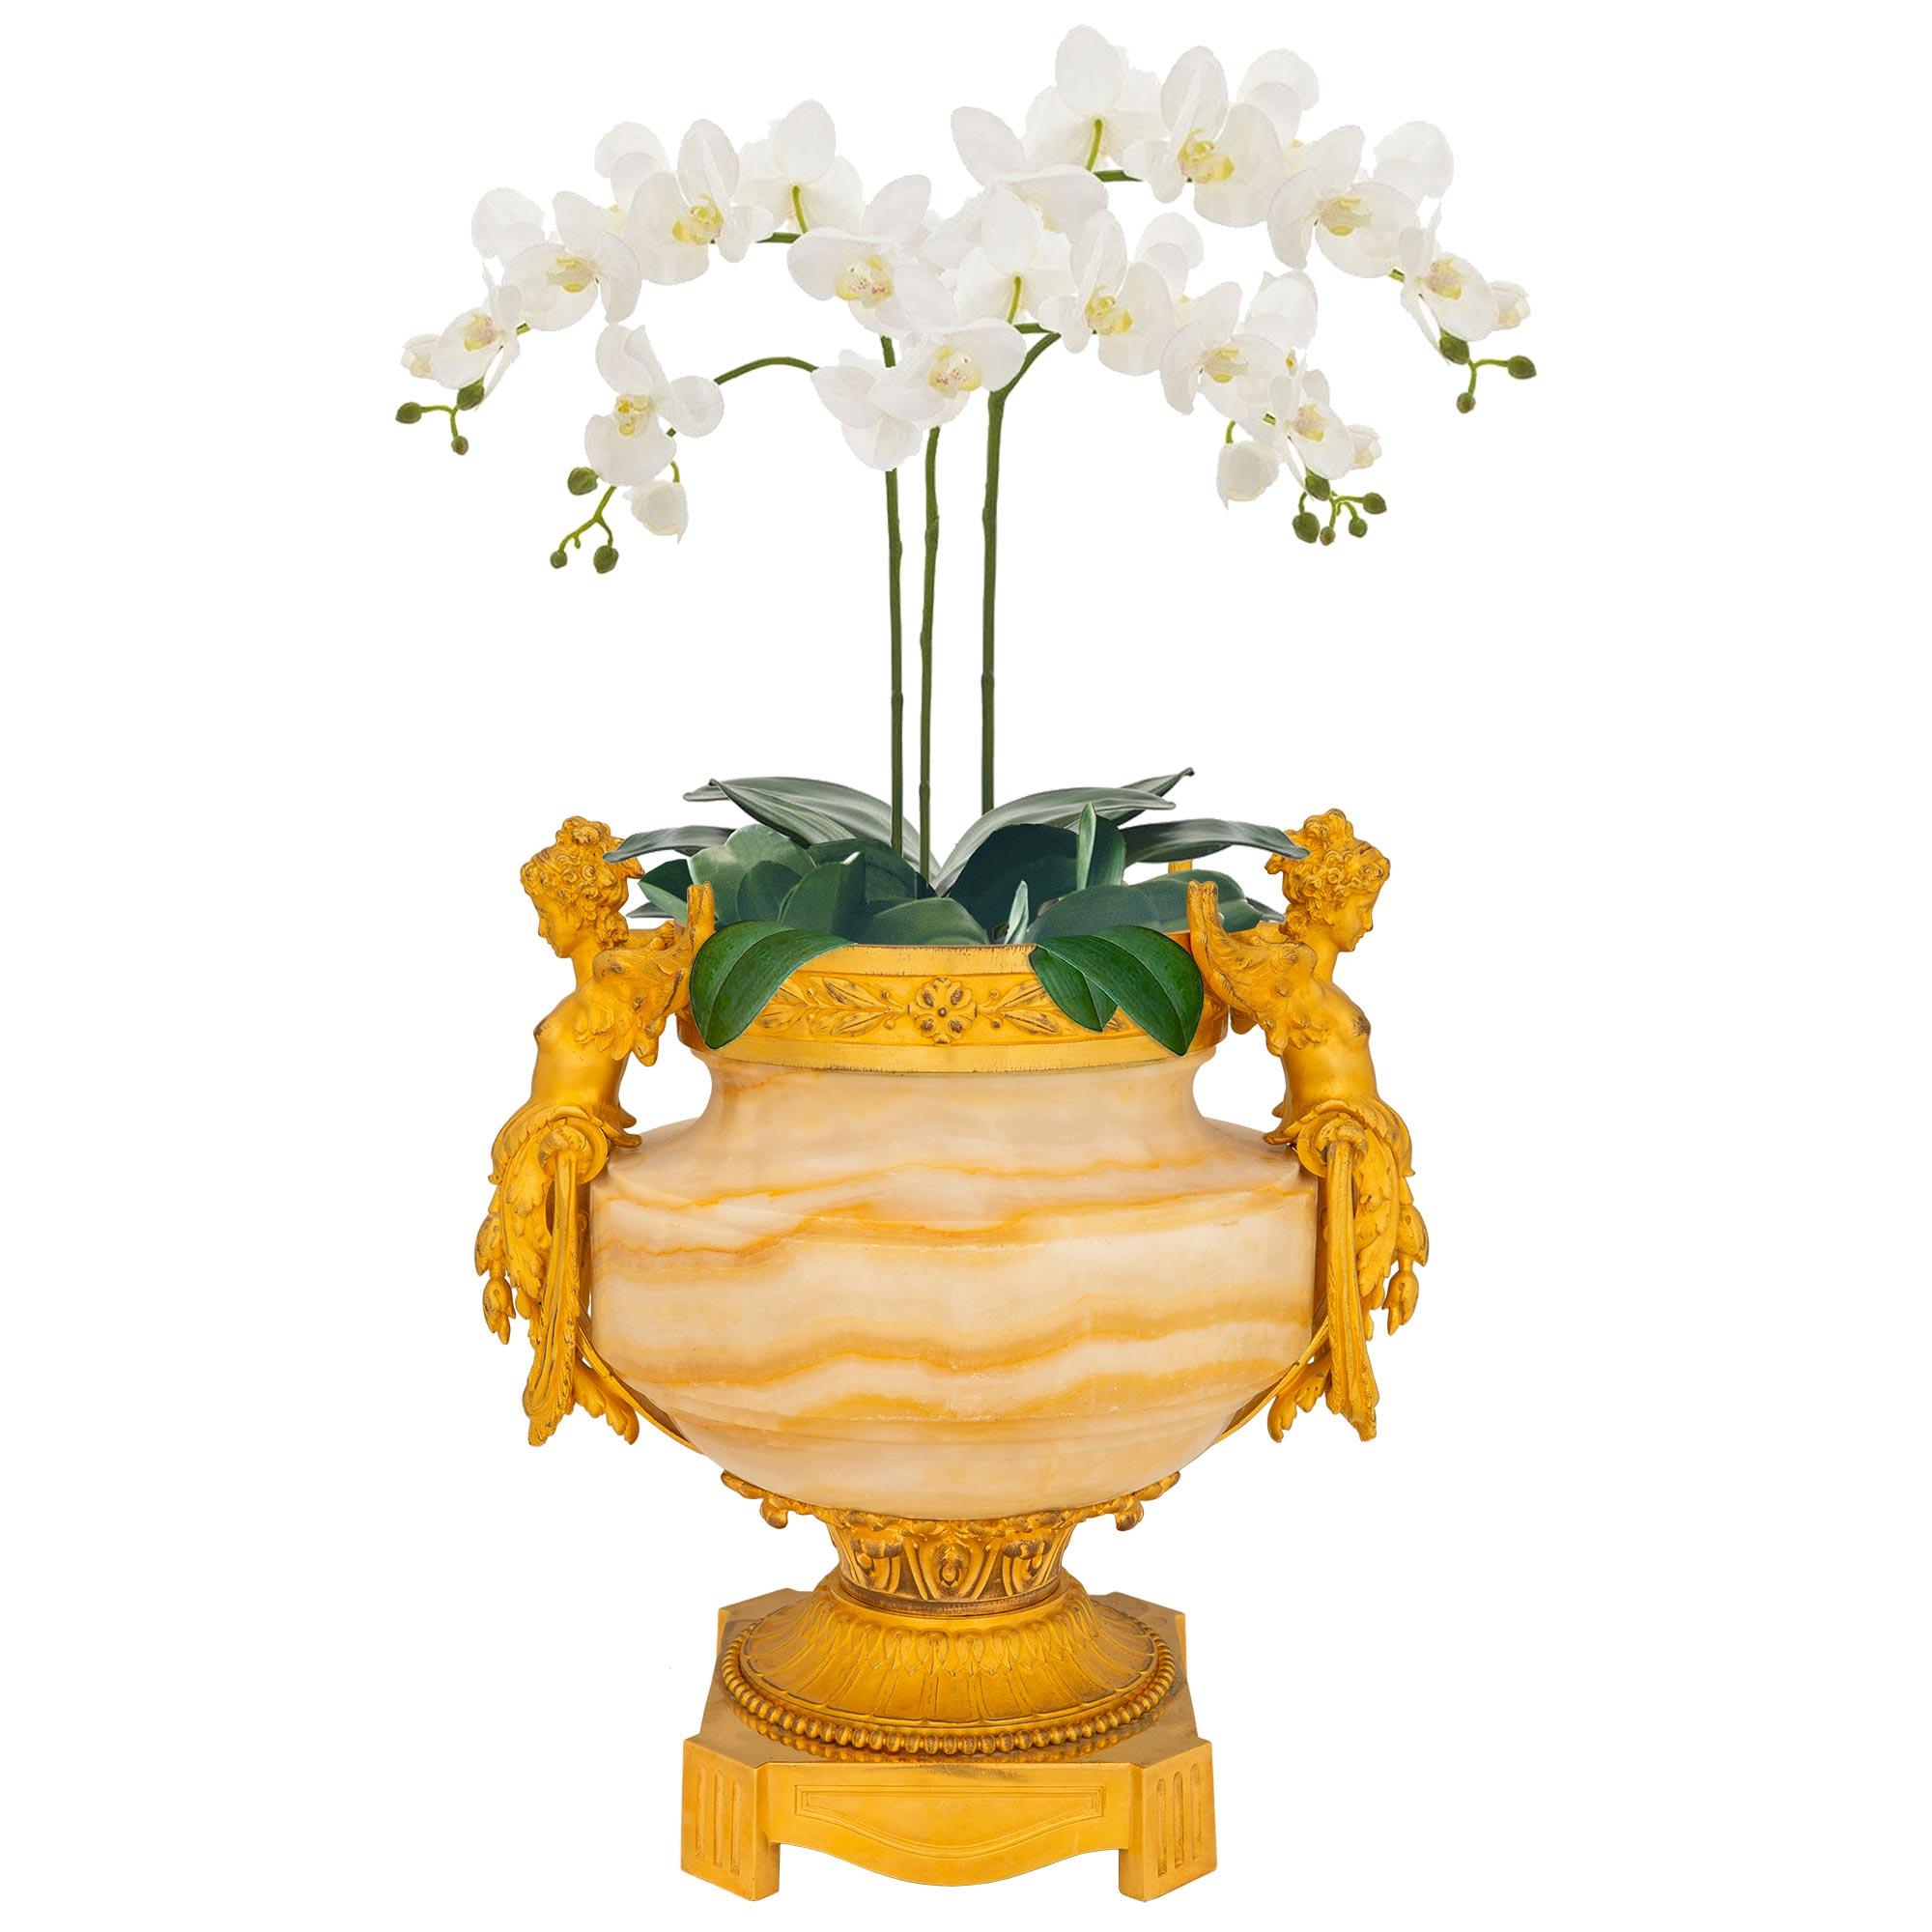 French 19th Century Louis XVI St. Belle Époque Period Onyx and Ormolu Urn For Sale 7